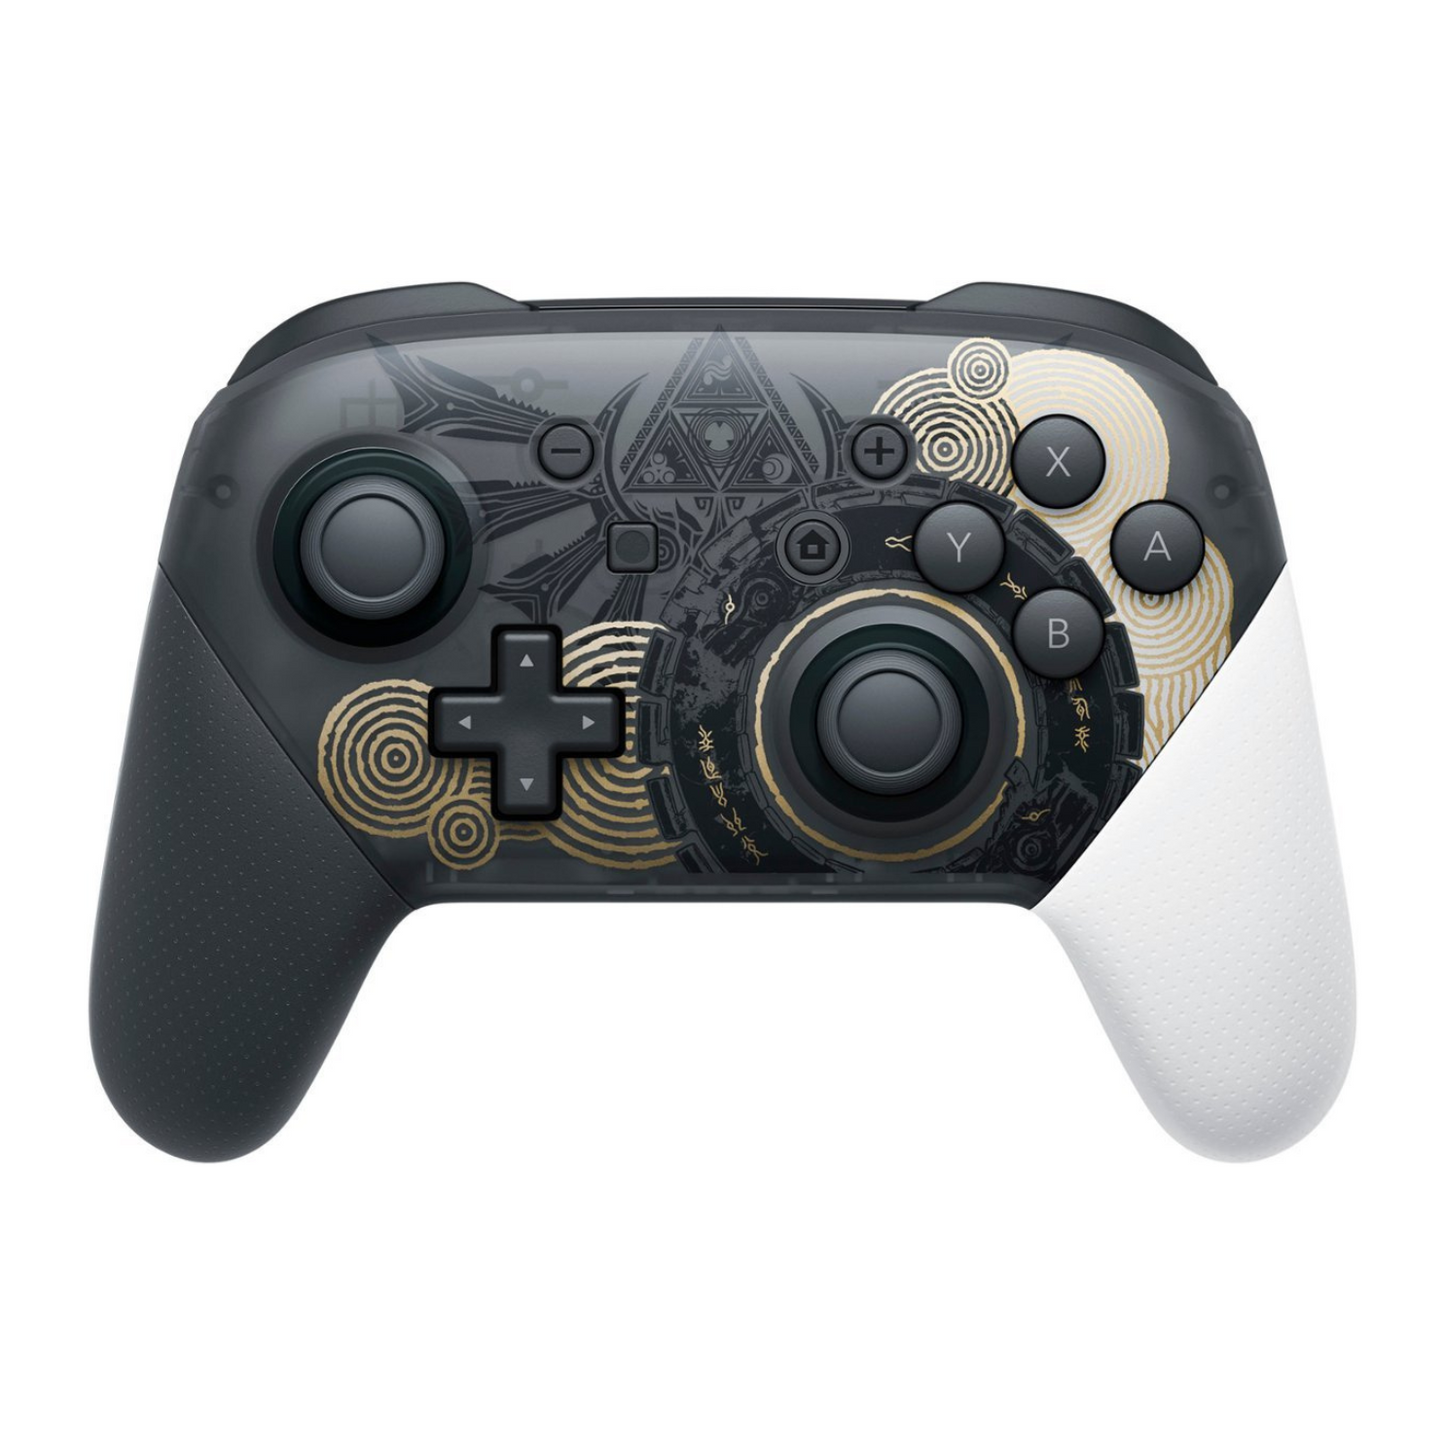 Nintendo Switch Pro Controller - The Legend of Zelda - Tears of the Kingdom Edition